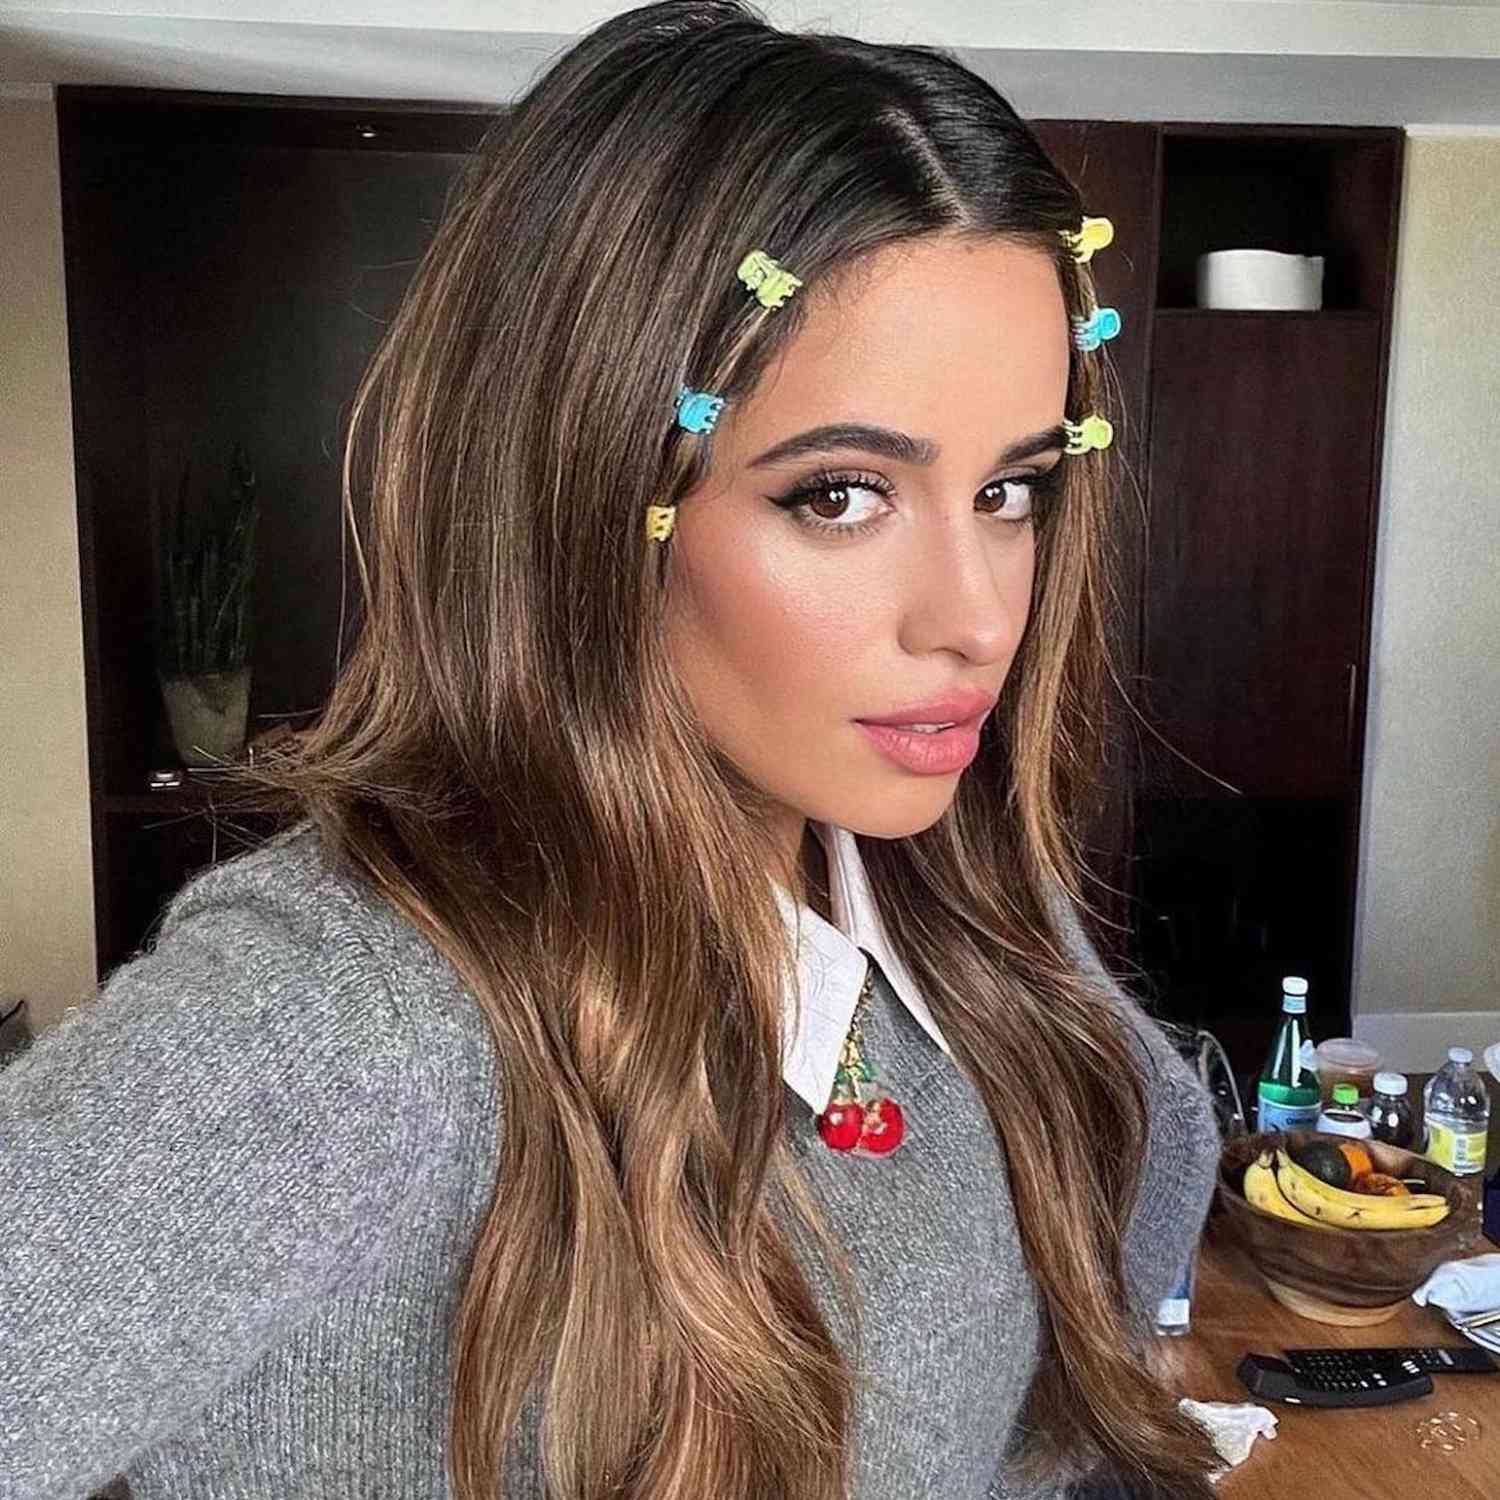 Camilla Cabello wearing small blue, green, and yellow clips 